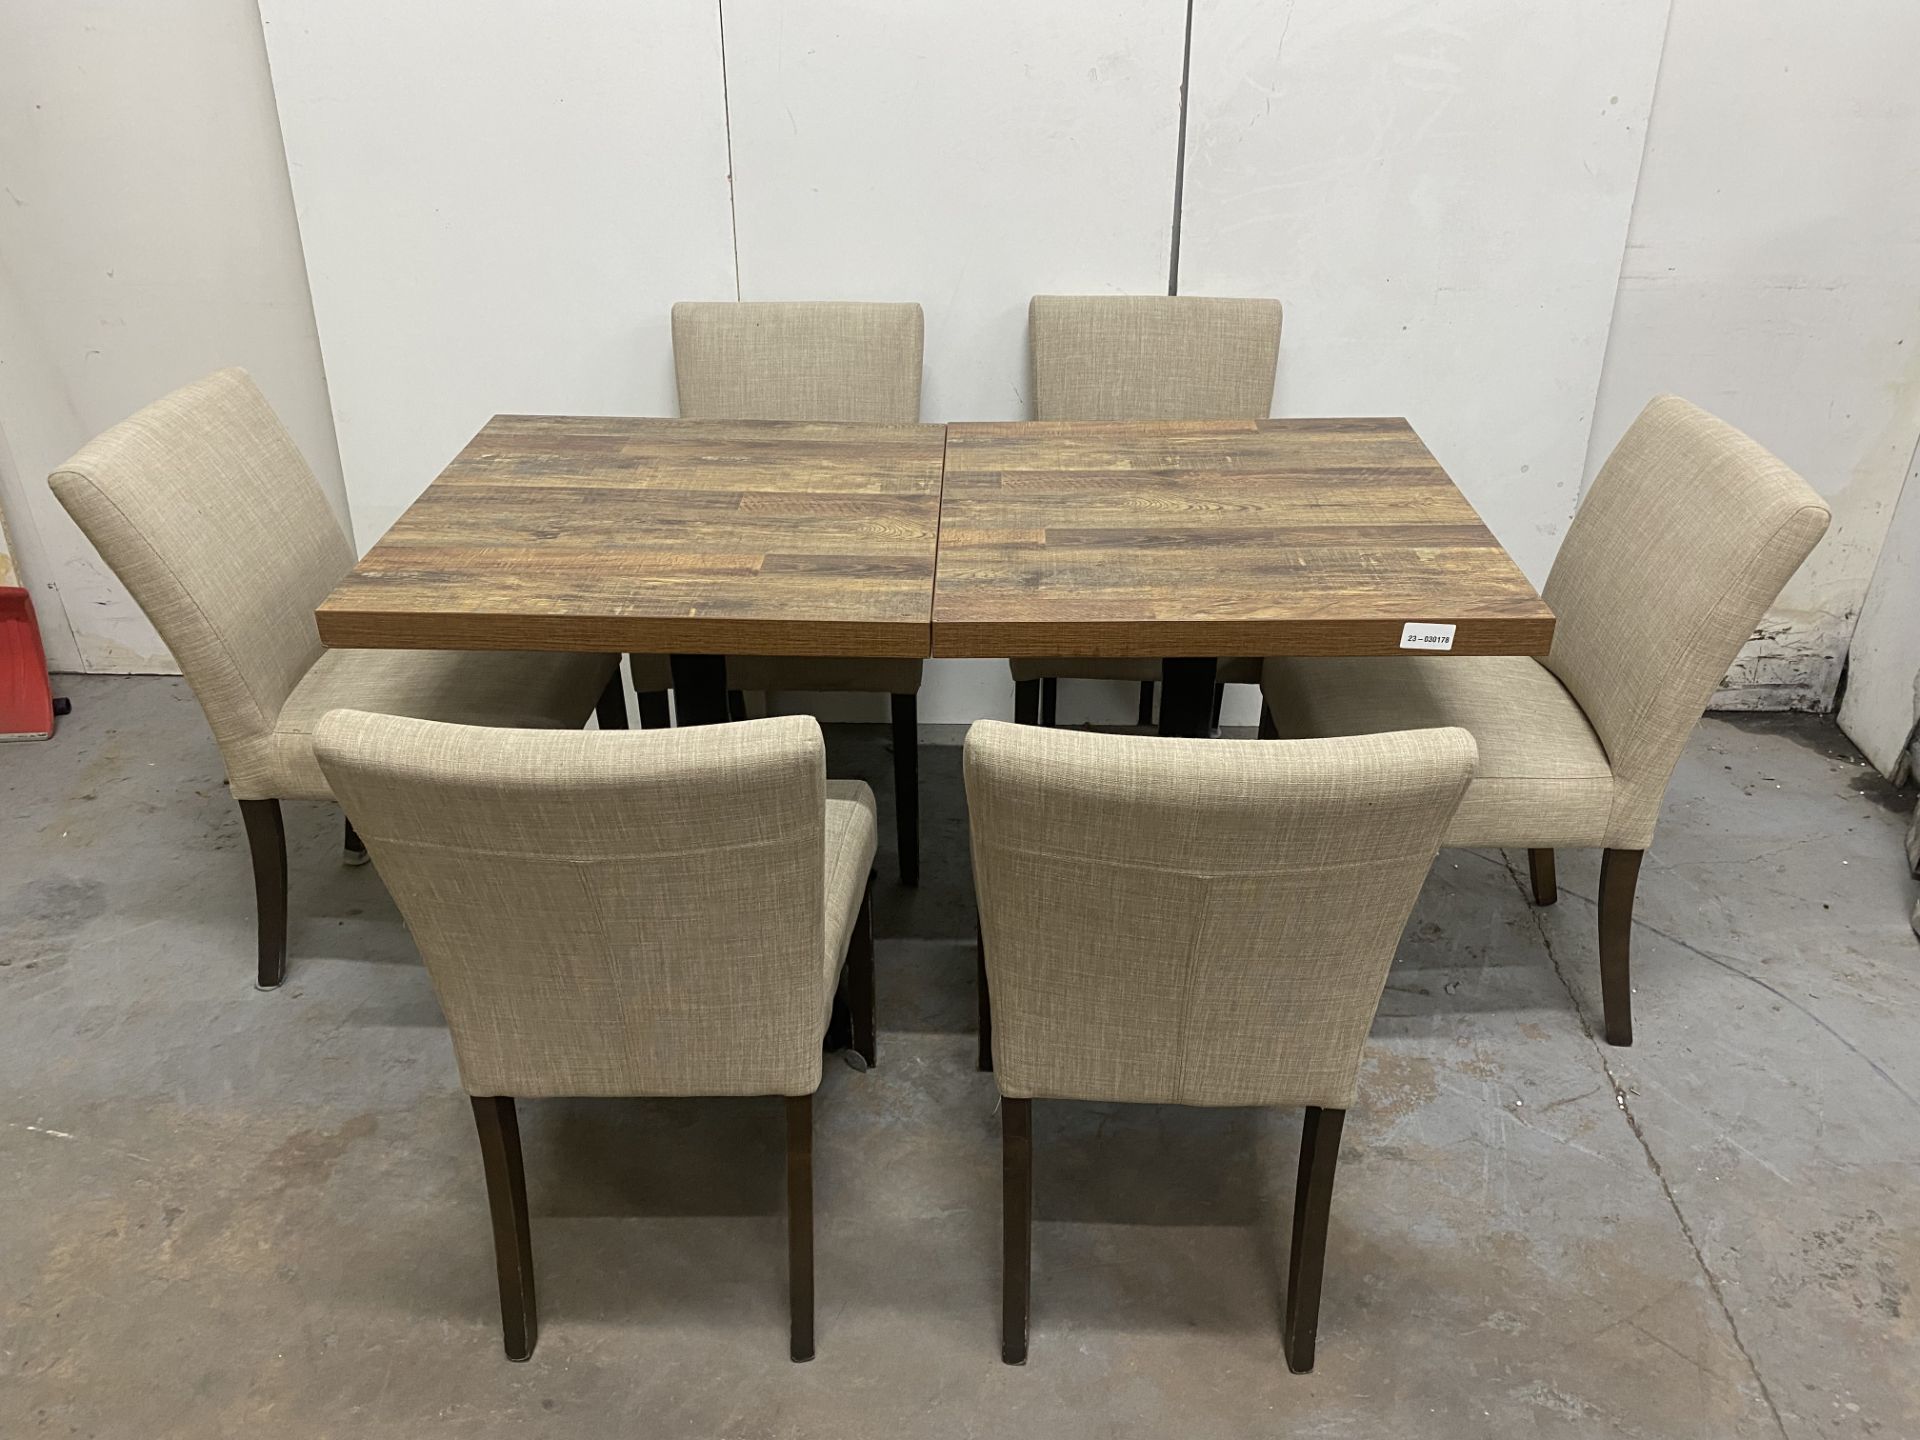 2 x Tables & 6 x Chairs Set